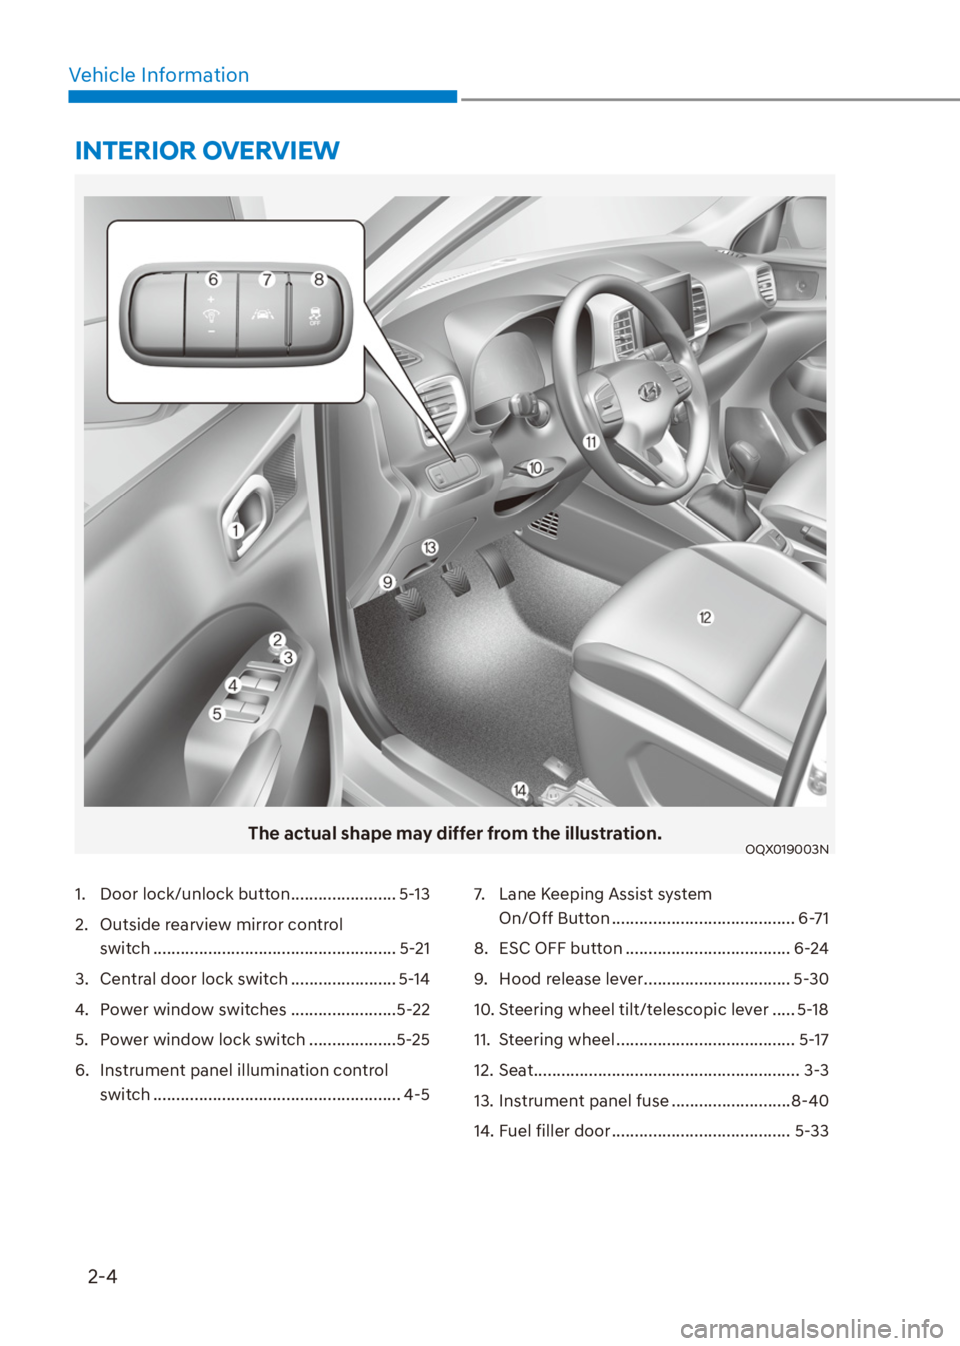 HYUNDAI VENUE 2021 User Guide 2-4
Vehicle Information
The actual shape may differ from the illustration.OQX019003N
1.  Door lock/unlock button ....................... 5-13
2.  Outside rearview mirror control  
switch .............